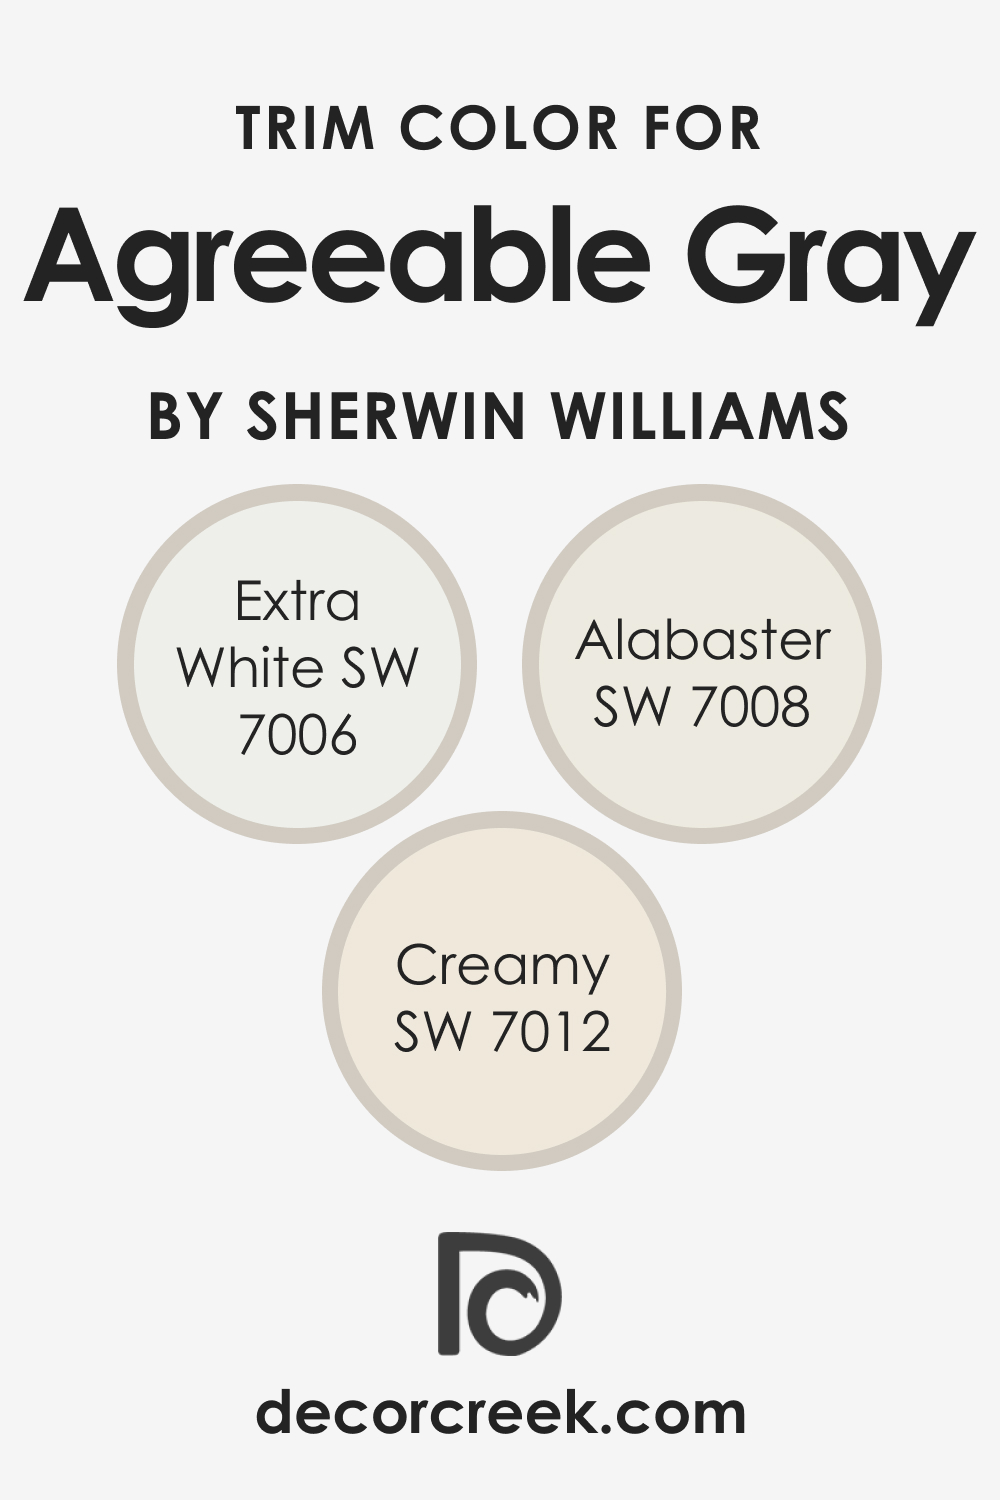 Trim Colors of SW 7029 Agreeable Gray